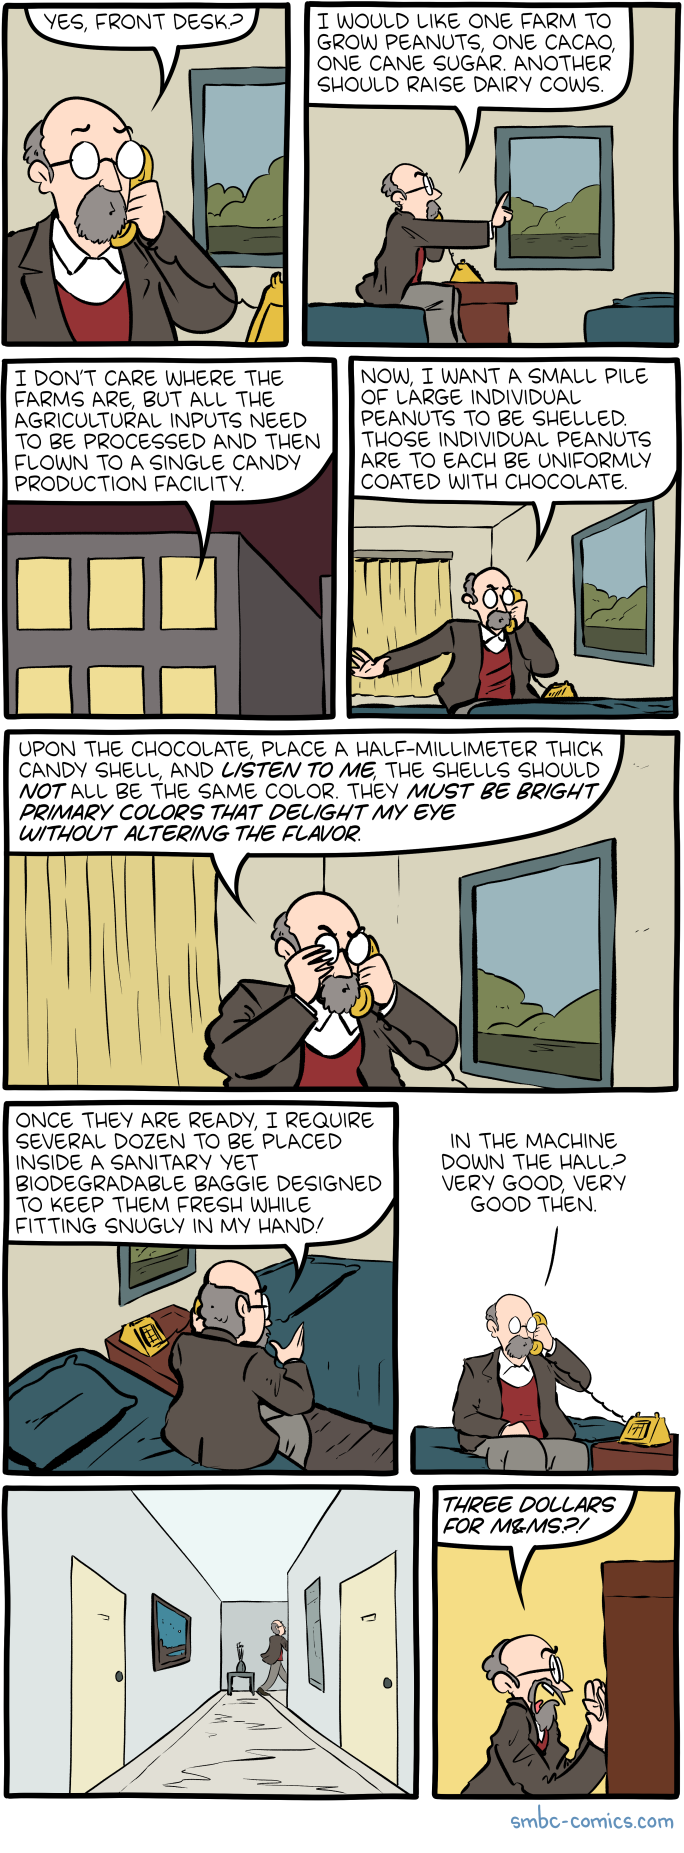 Saturday Morning Breakfast Cereal comics – I, Candy